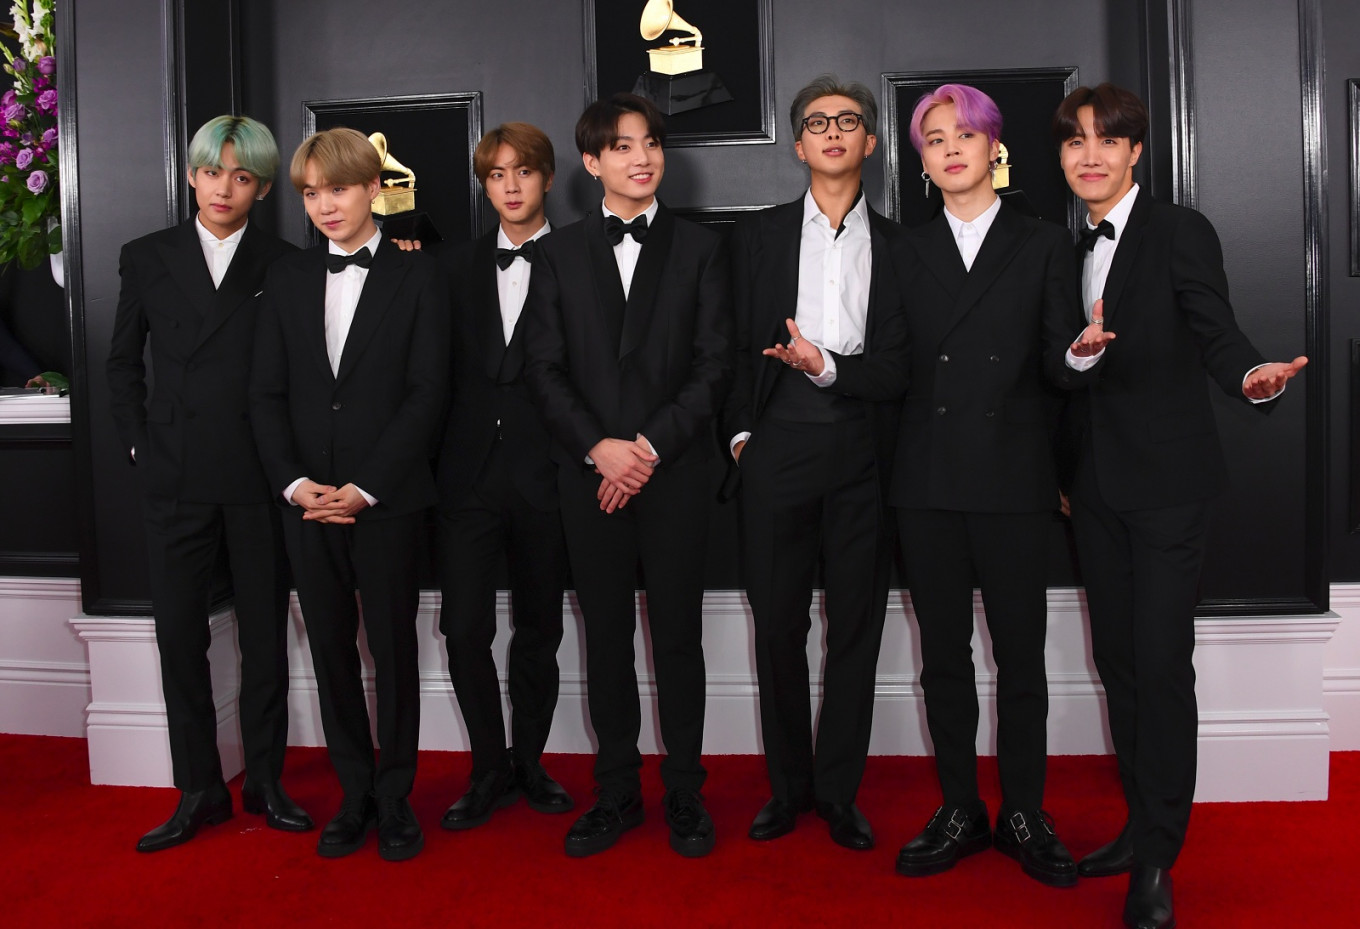 BTS nominated Grammys 2019 for the first time!